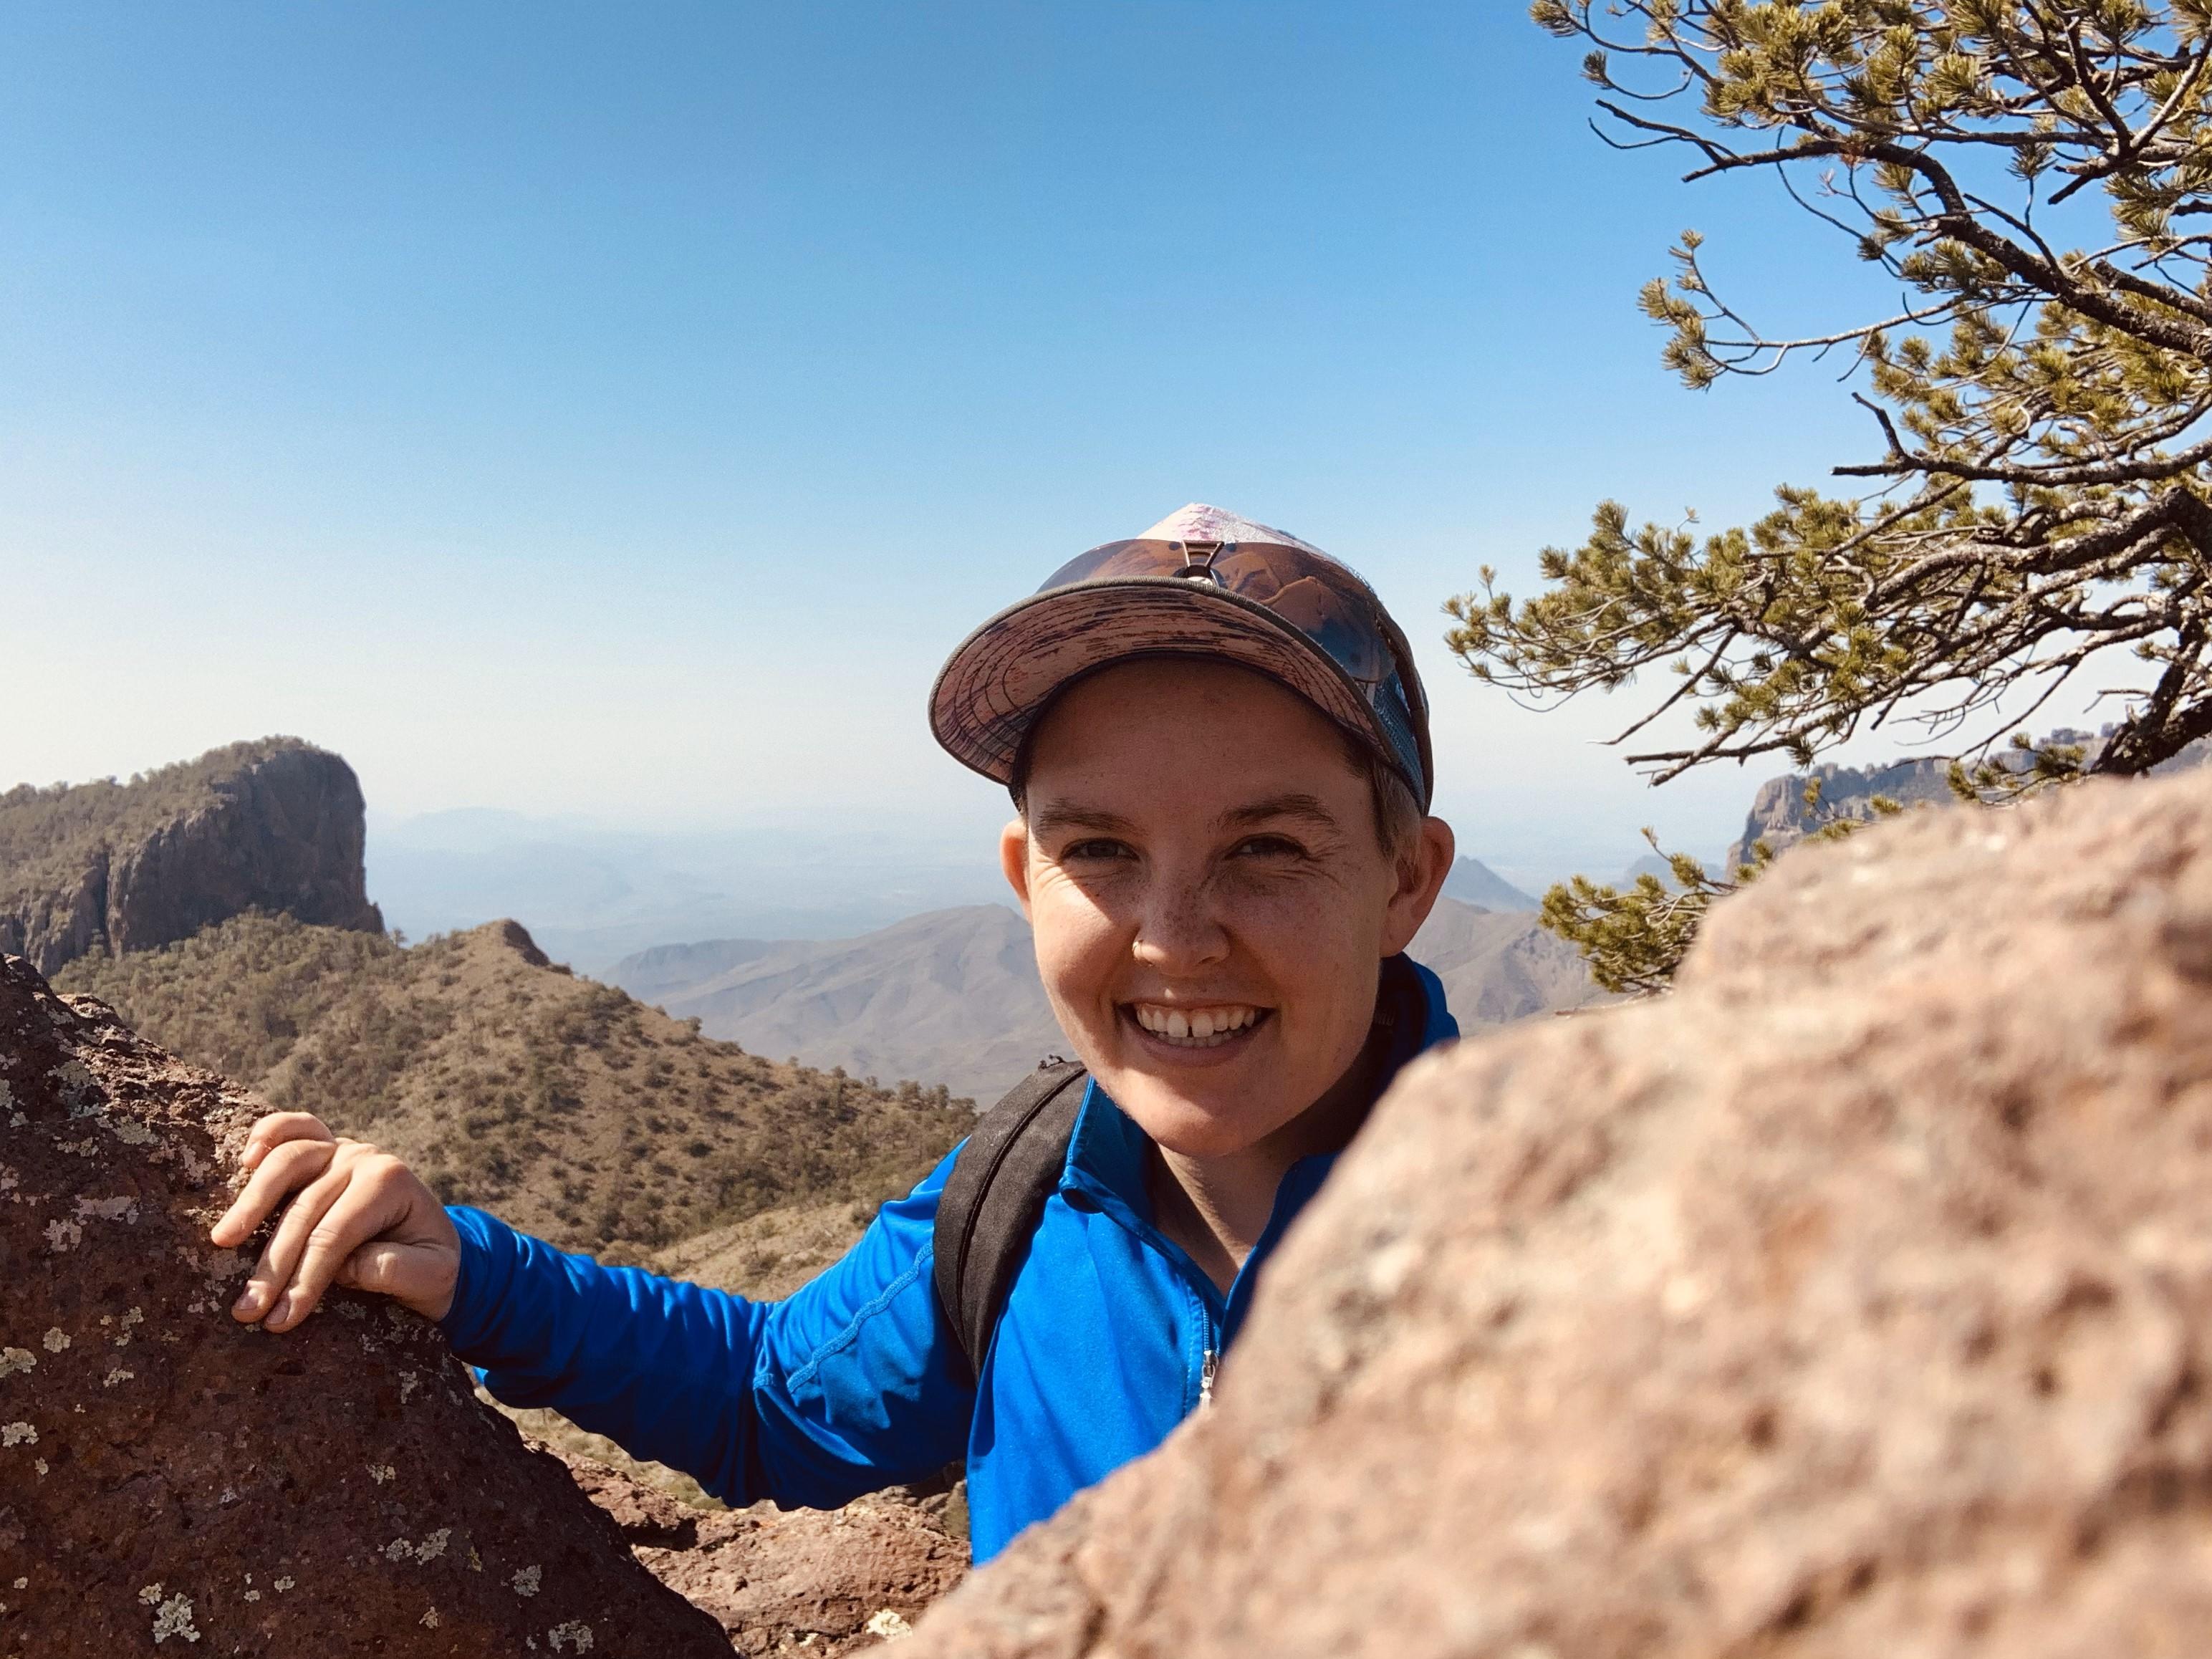 A smiling light skinned person with a hat on, blue long sleeve shirt, a backpack, who is rock climbing